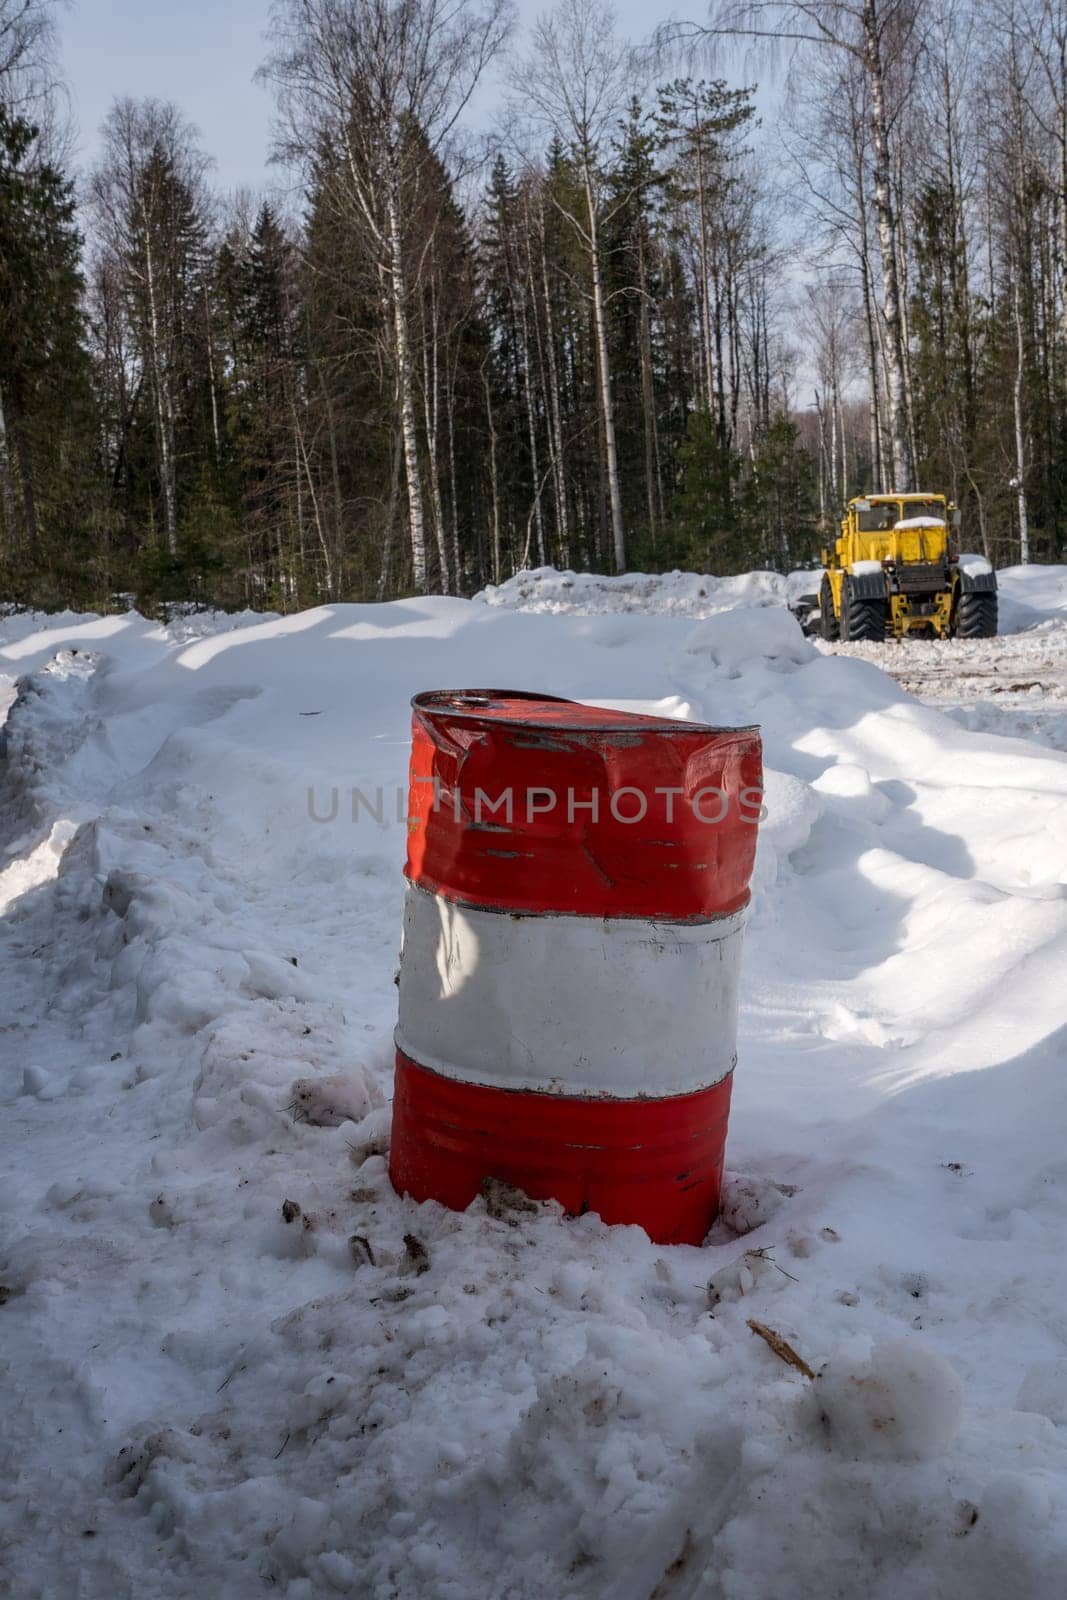 Image of striped barrel and working snowplow on background